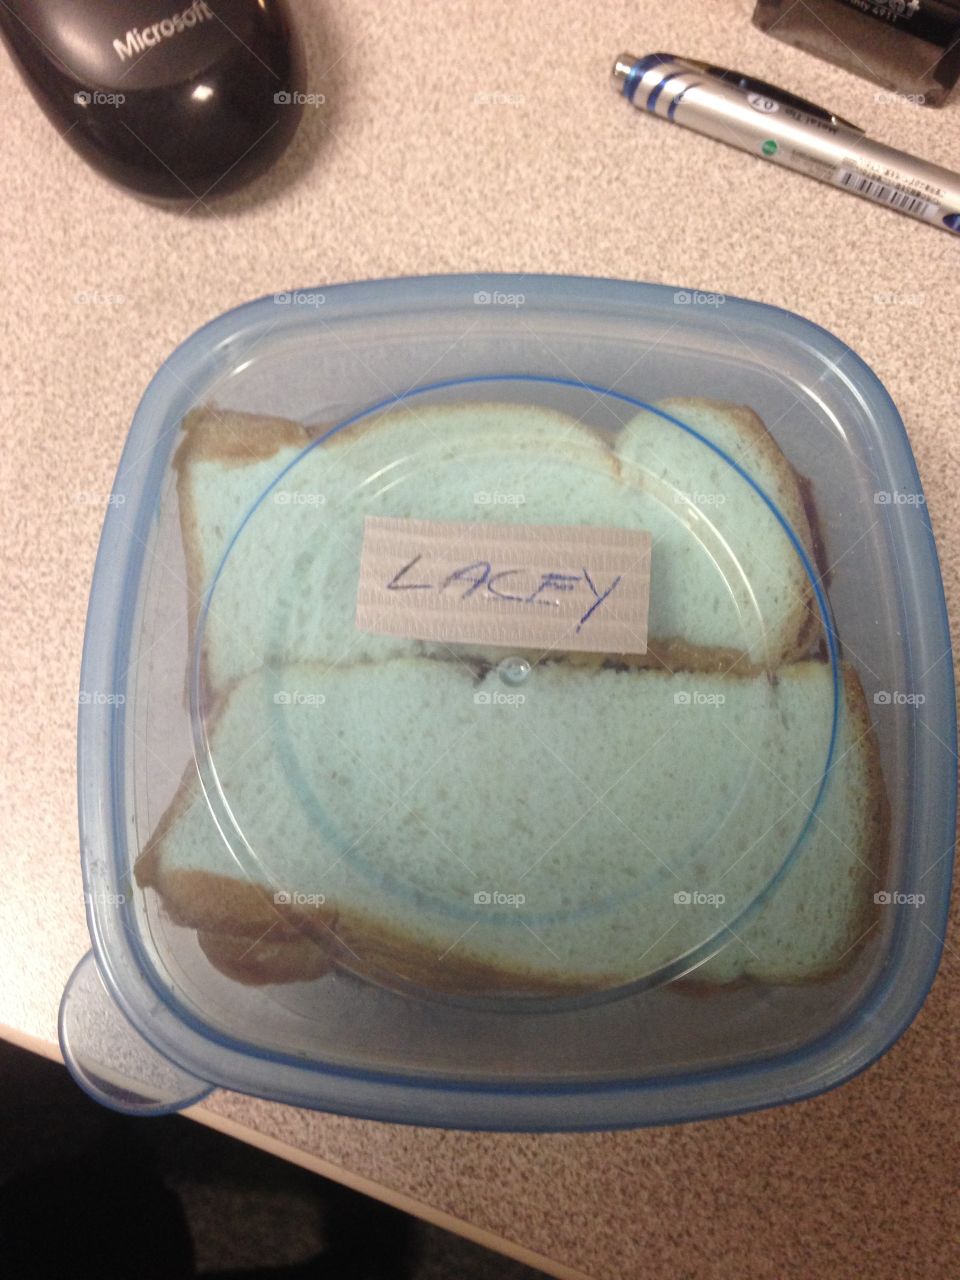 A nicely packaged sandwich for lunch at my desk. But wait, Lacey is the dog's name?!?